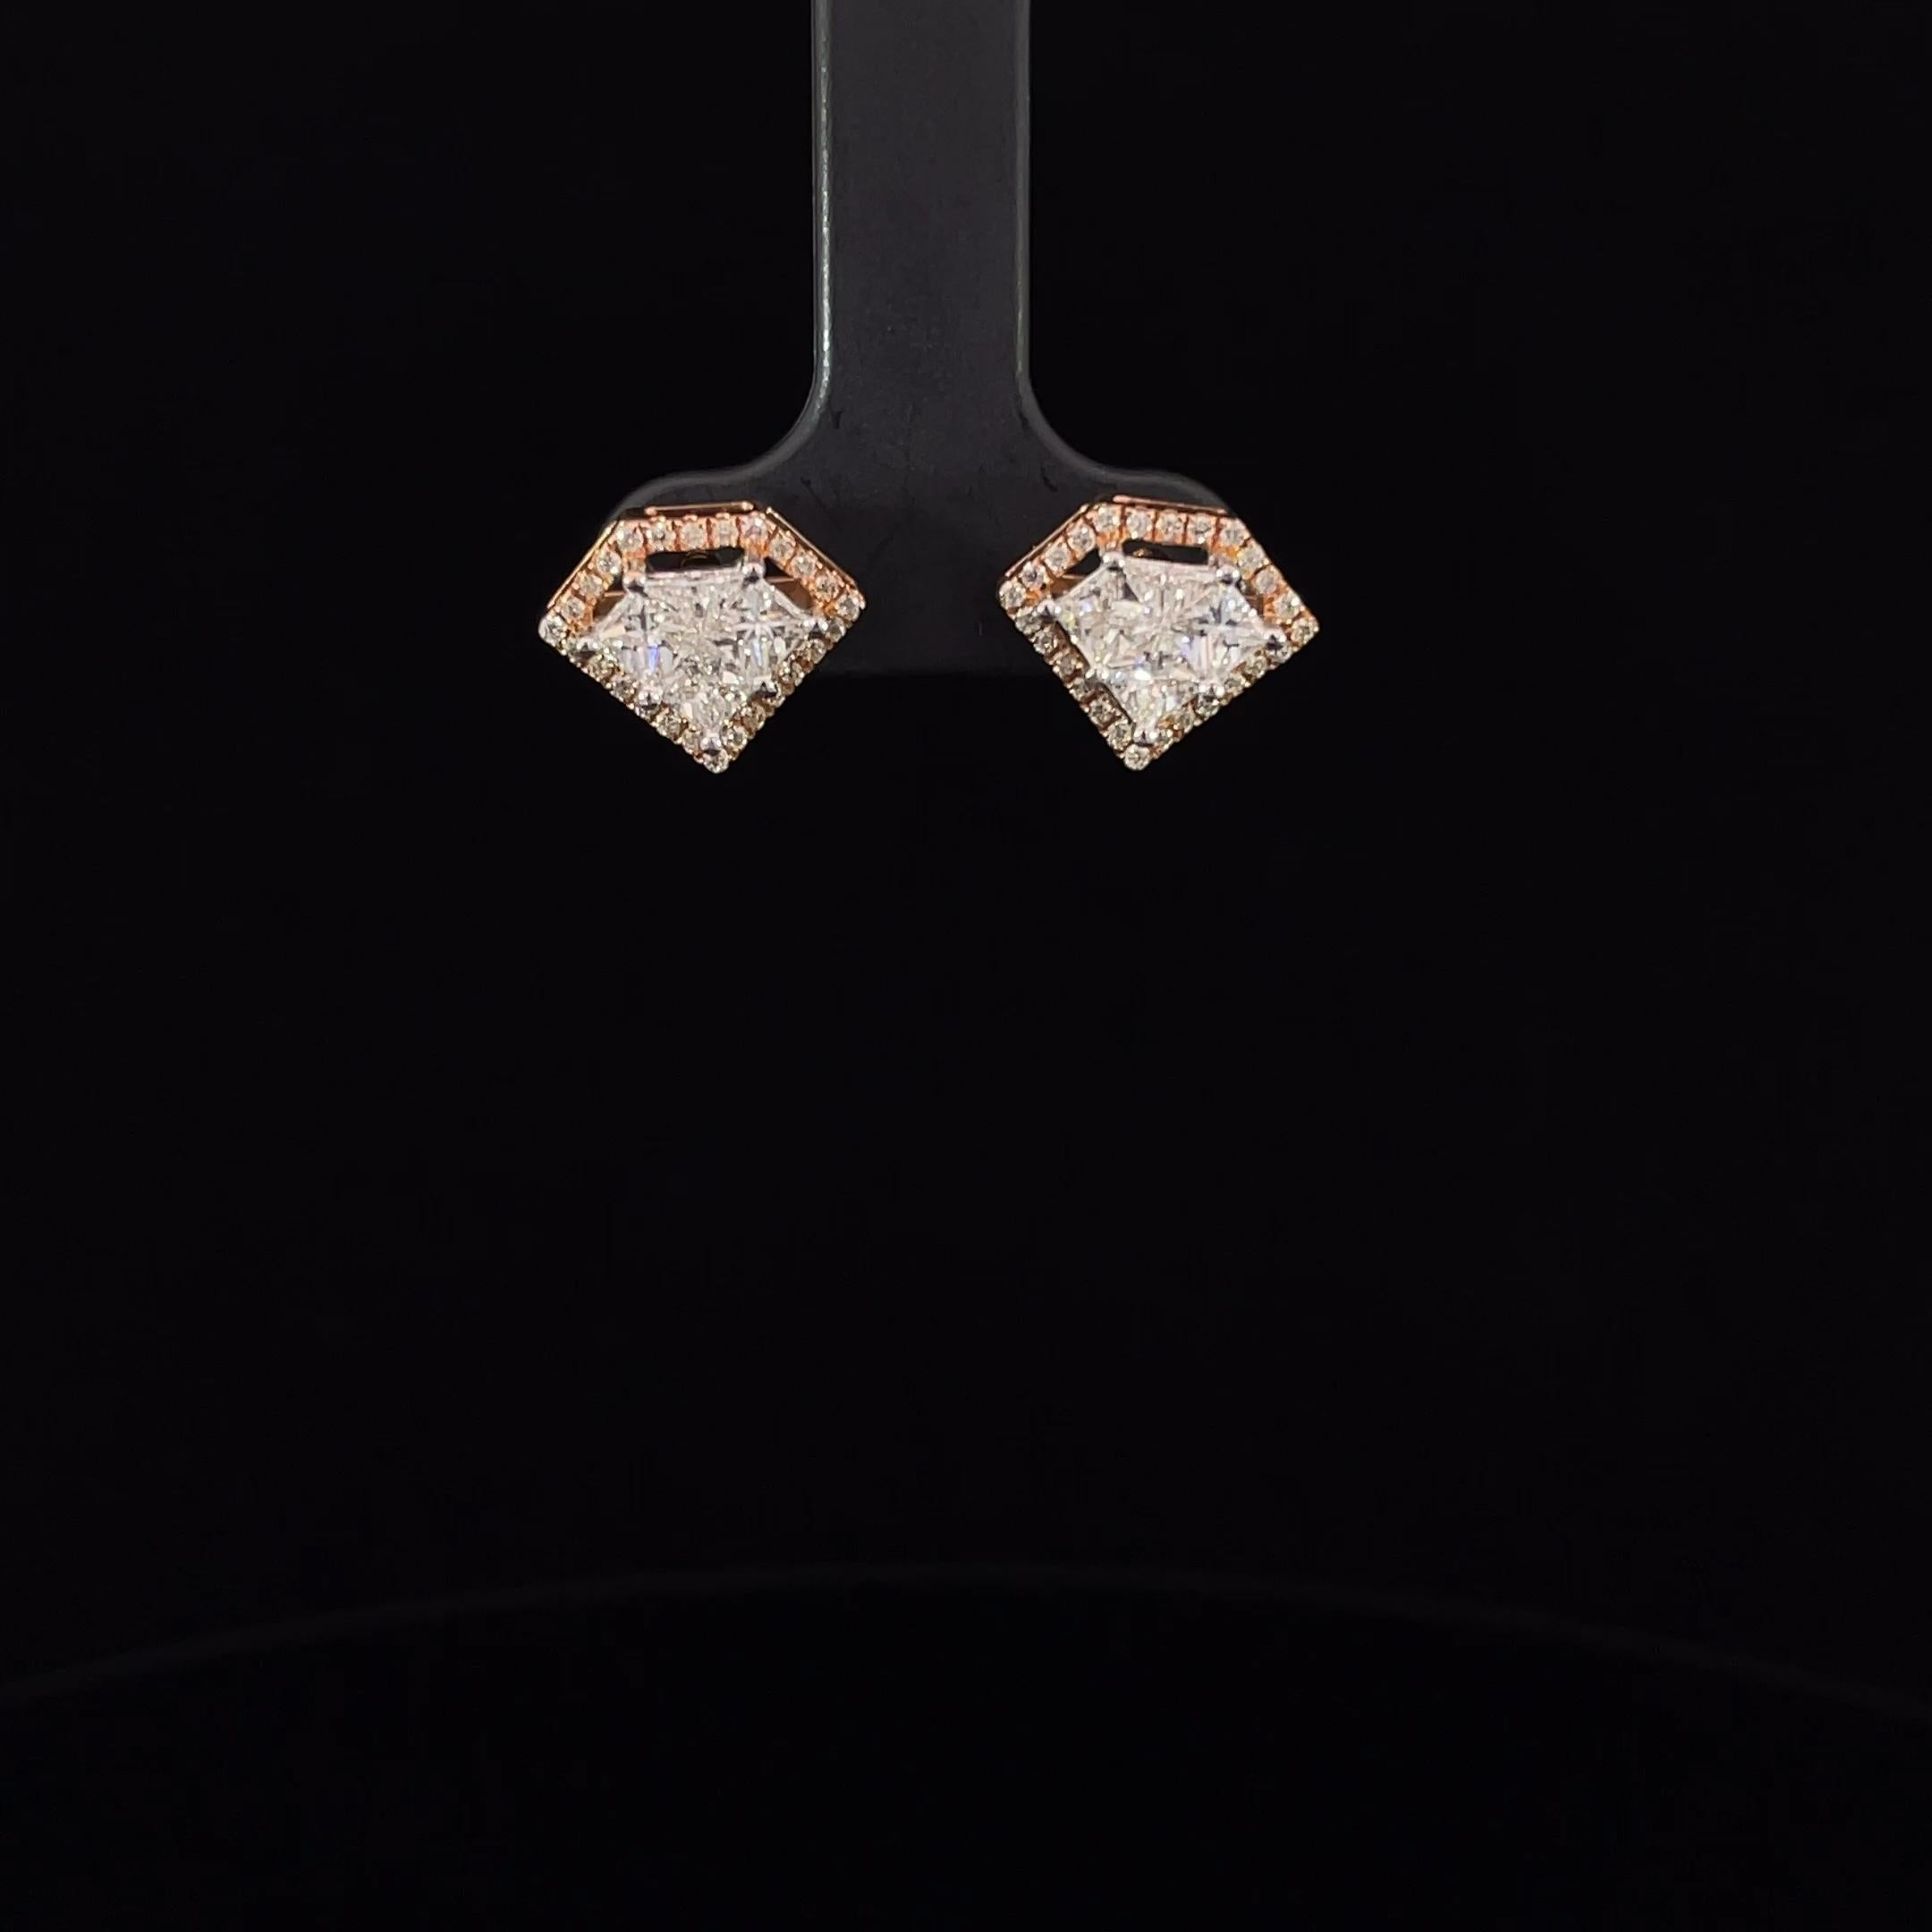 Introducing our Diamond Shaped Earring, a dazzling embodiment of modern elegance and sophistication. These earrings feature a central Round Brilliant Cut diamond, weighing 0.2 carats, surrounded by the intricate beauty of a Pi Cut diamond, totaling